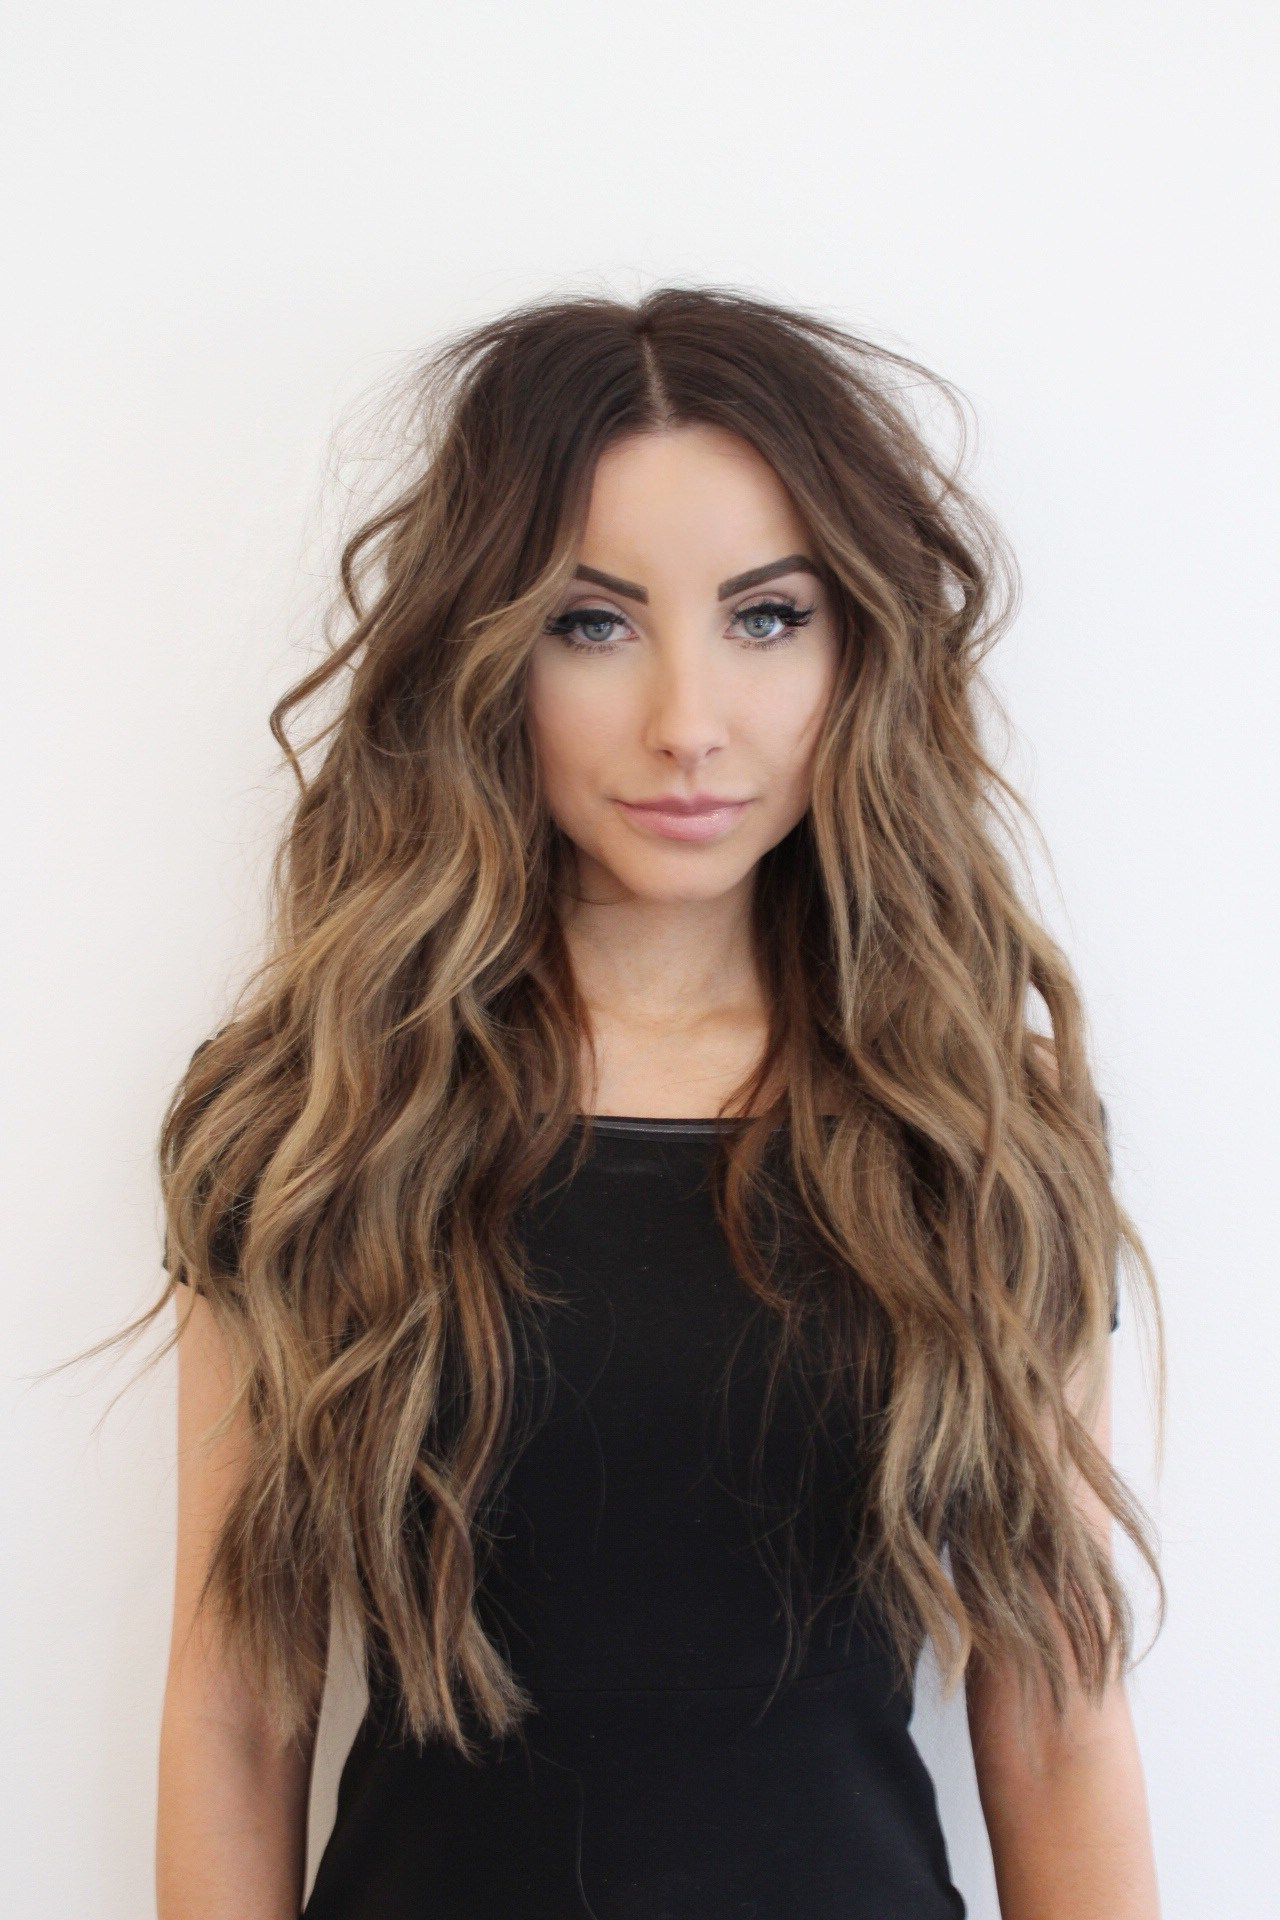 35 Gorgeous Styles To Get Beach Waves In Your Hair – Haircuts Regarding Well Known Beach Waves Hairstyles (View 15 of 20)